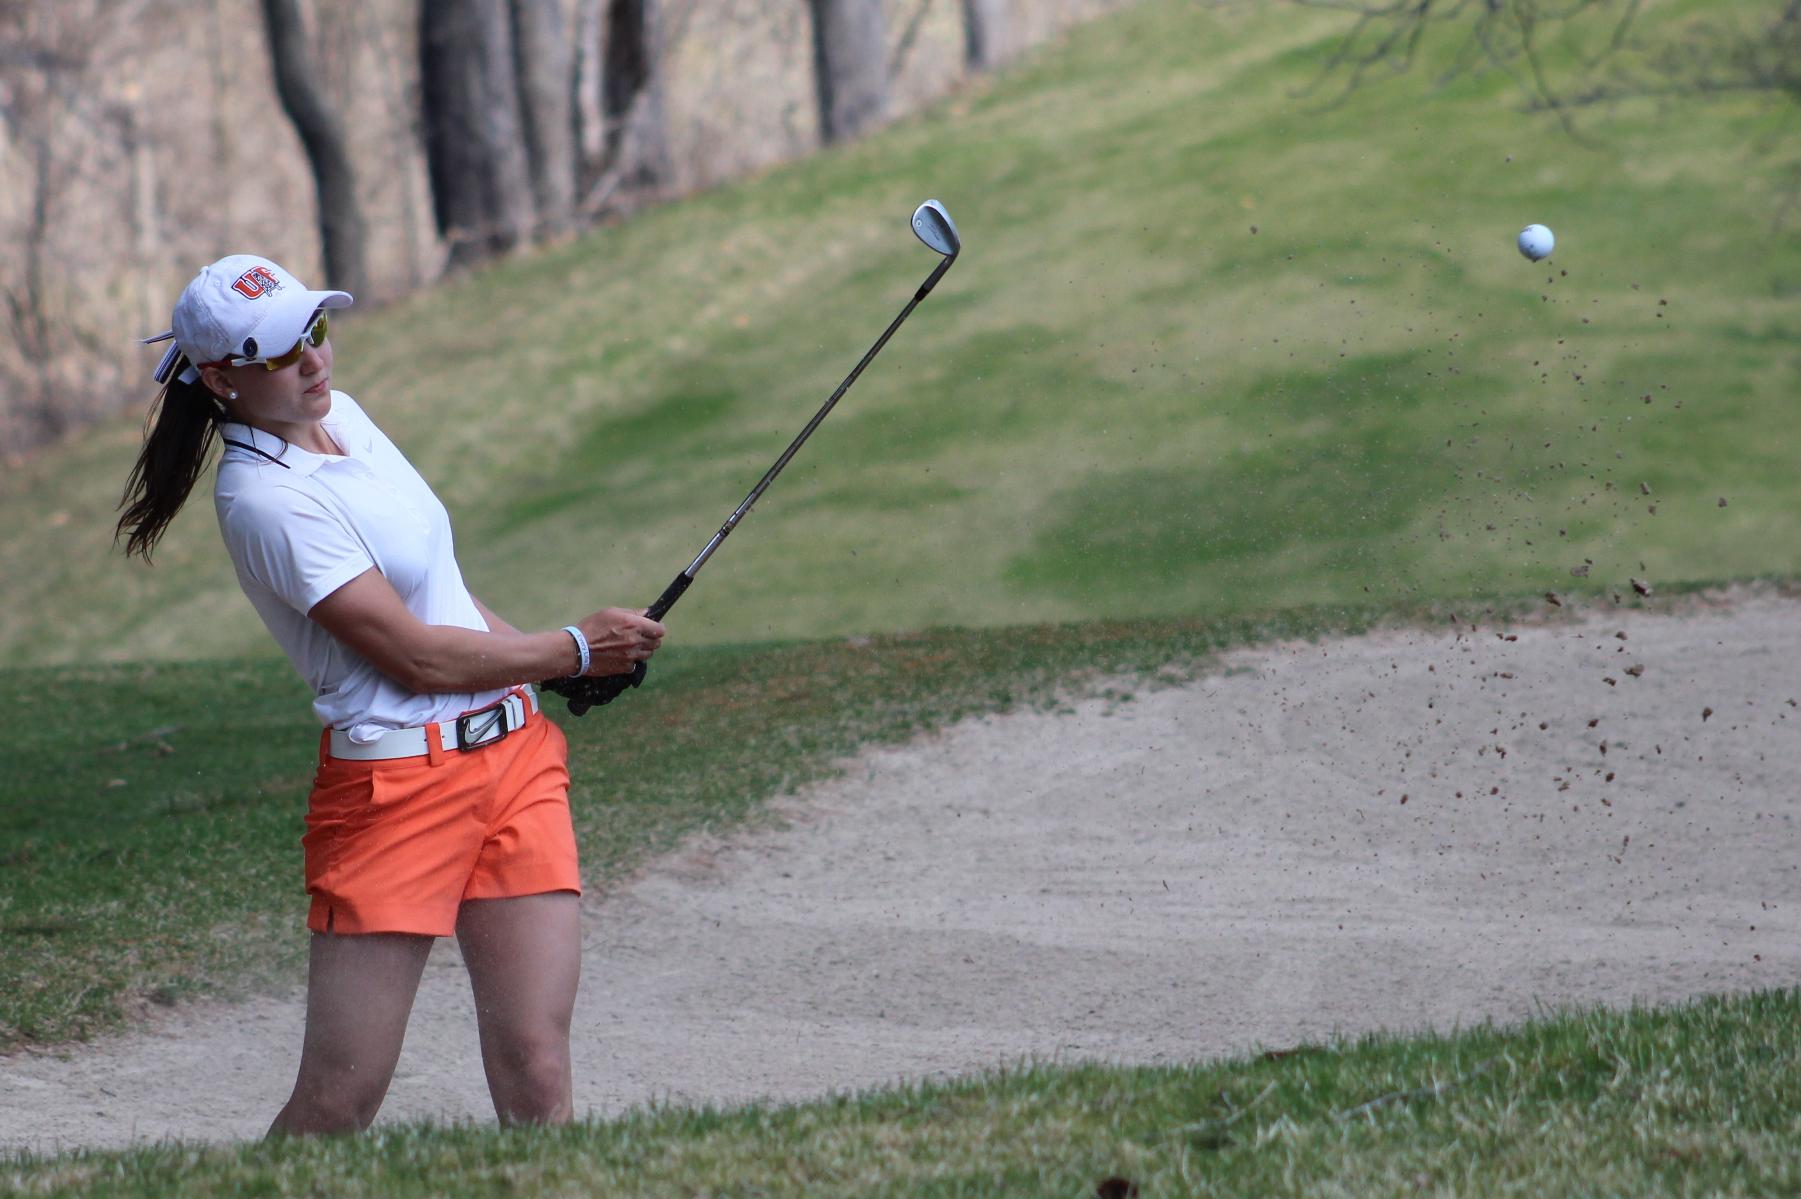 Findlay in First Place After One Round in Midland